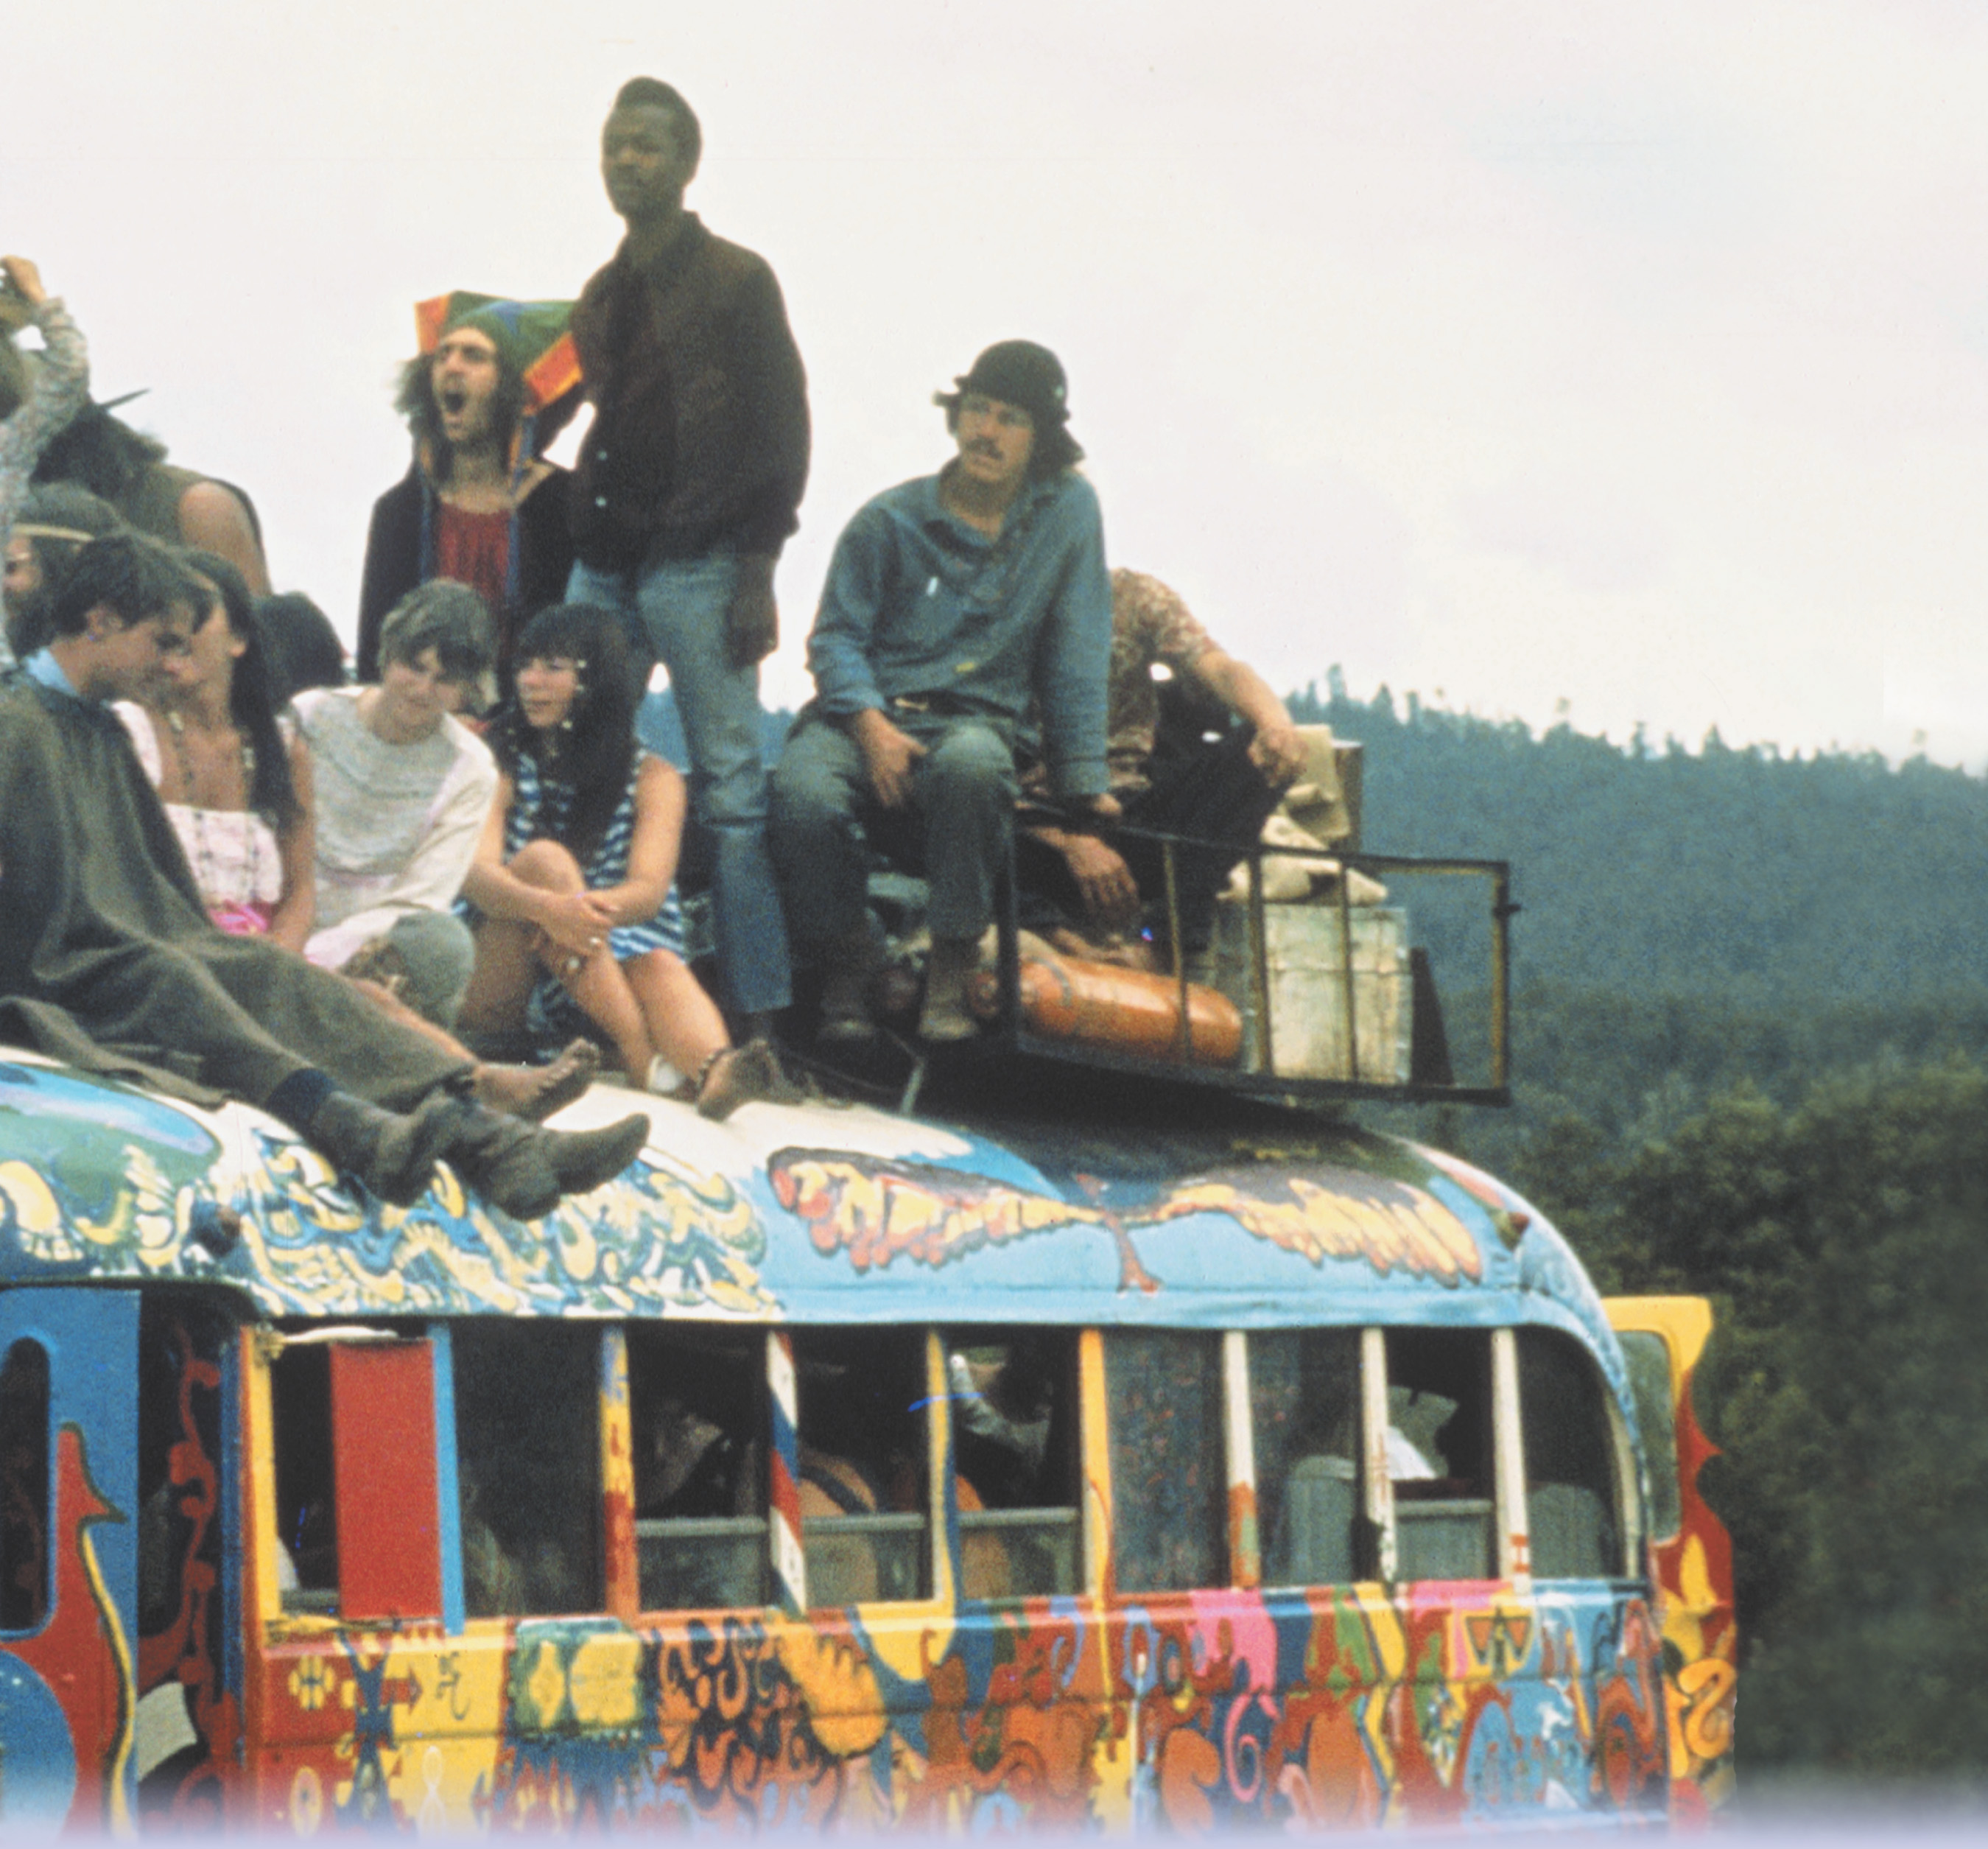 Photo: young people with long hair and colorful clothes sit atop a bus painted in wild colors. A title: An Era of Social Change.